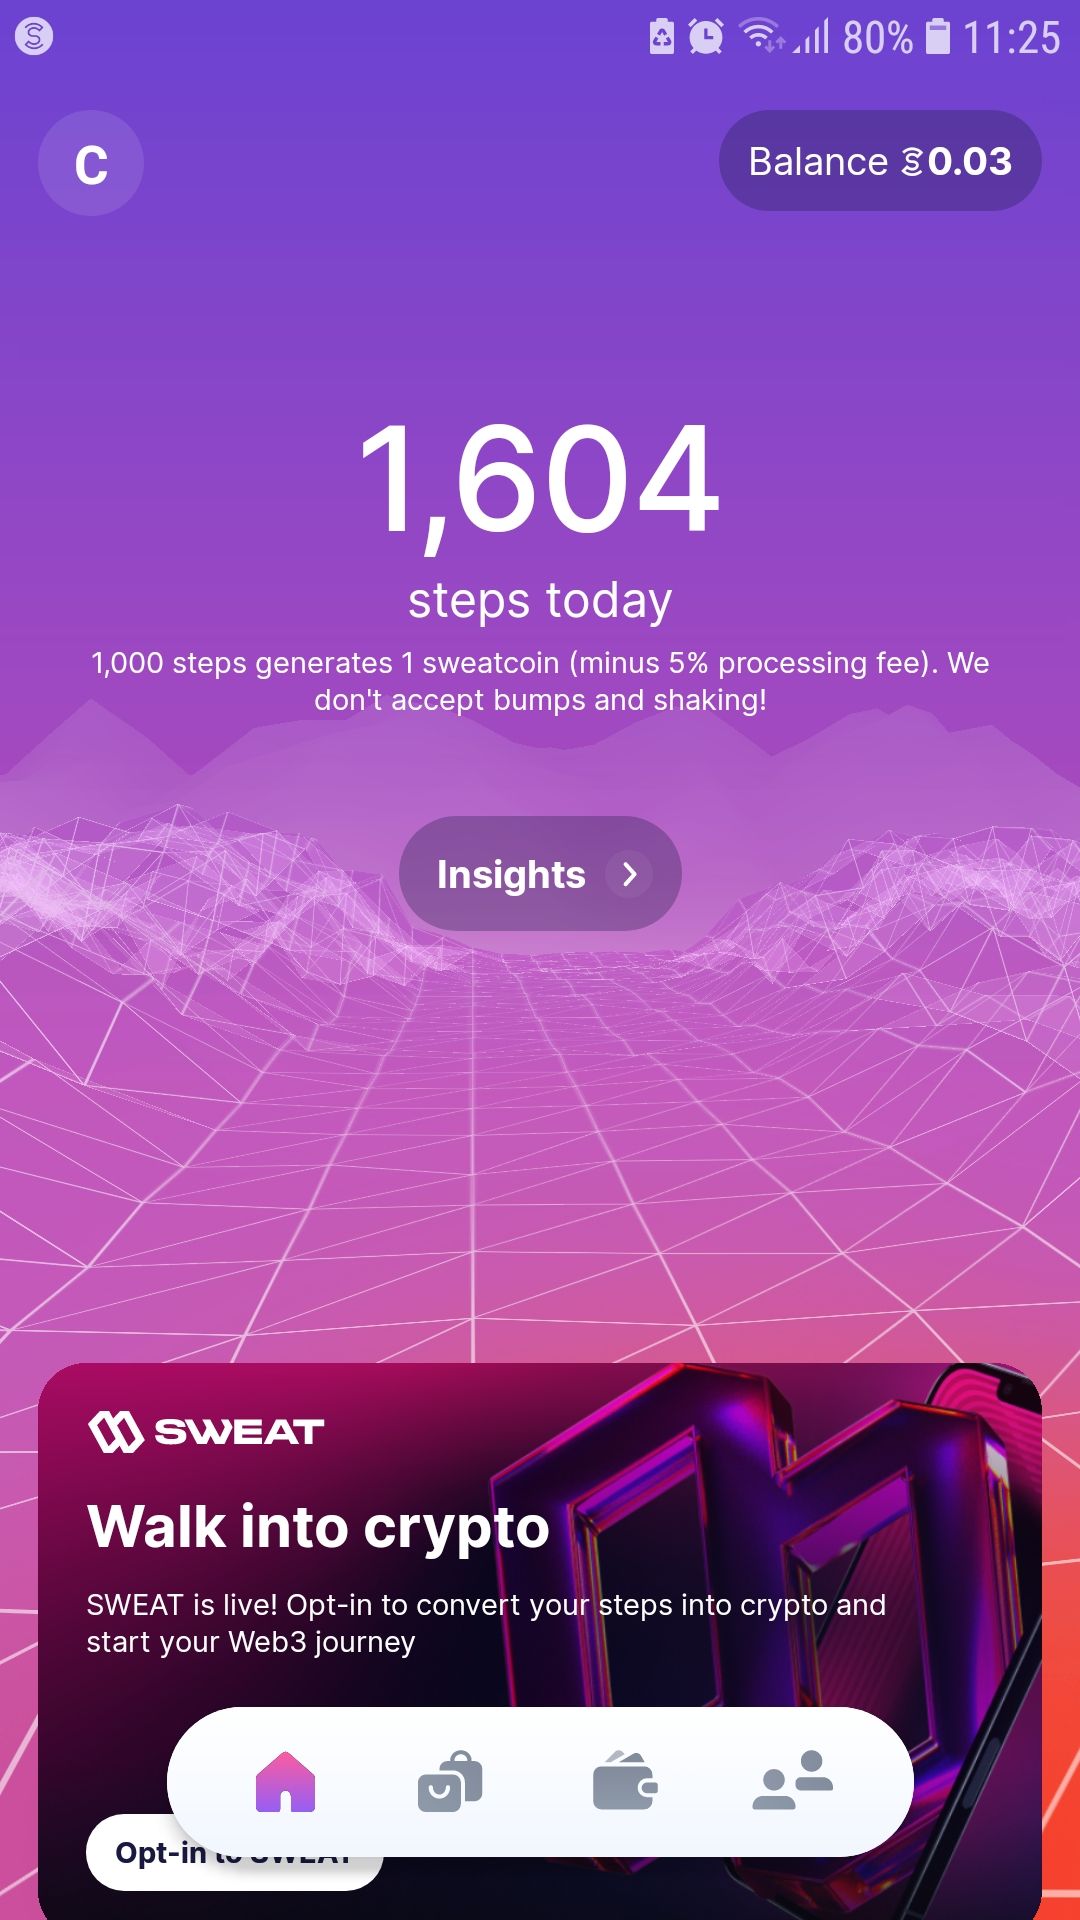 Sweatcoin step counter activity tracker mobile app